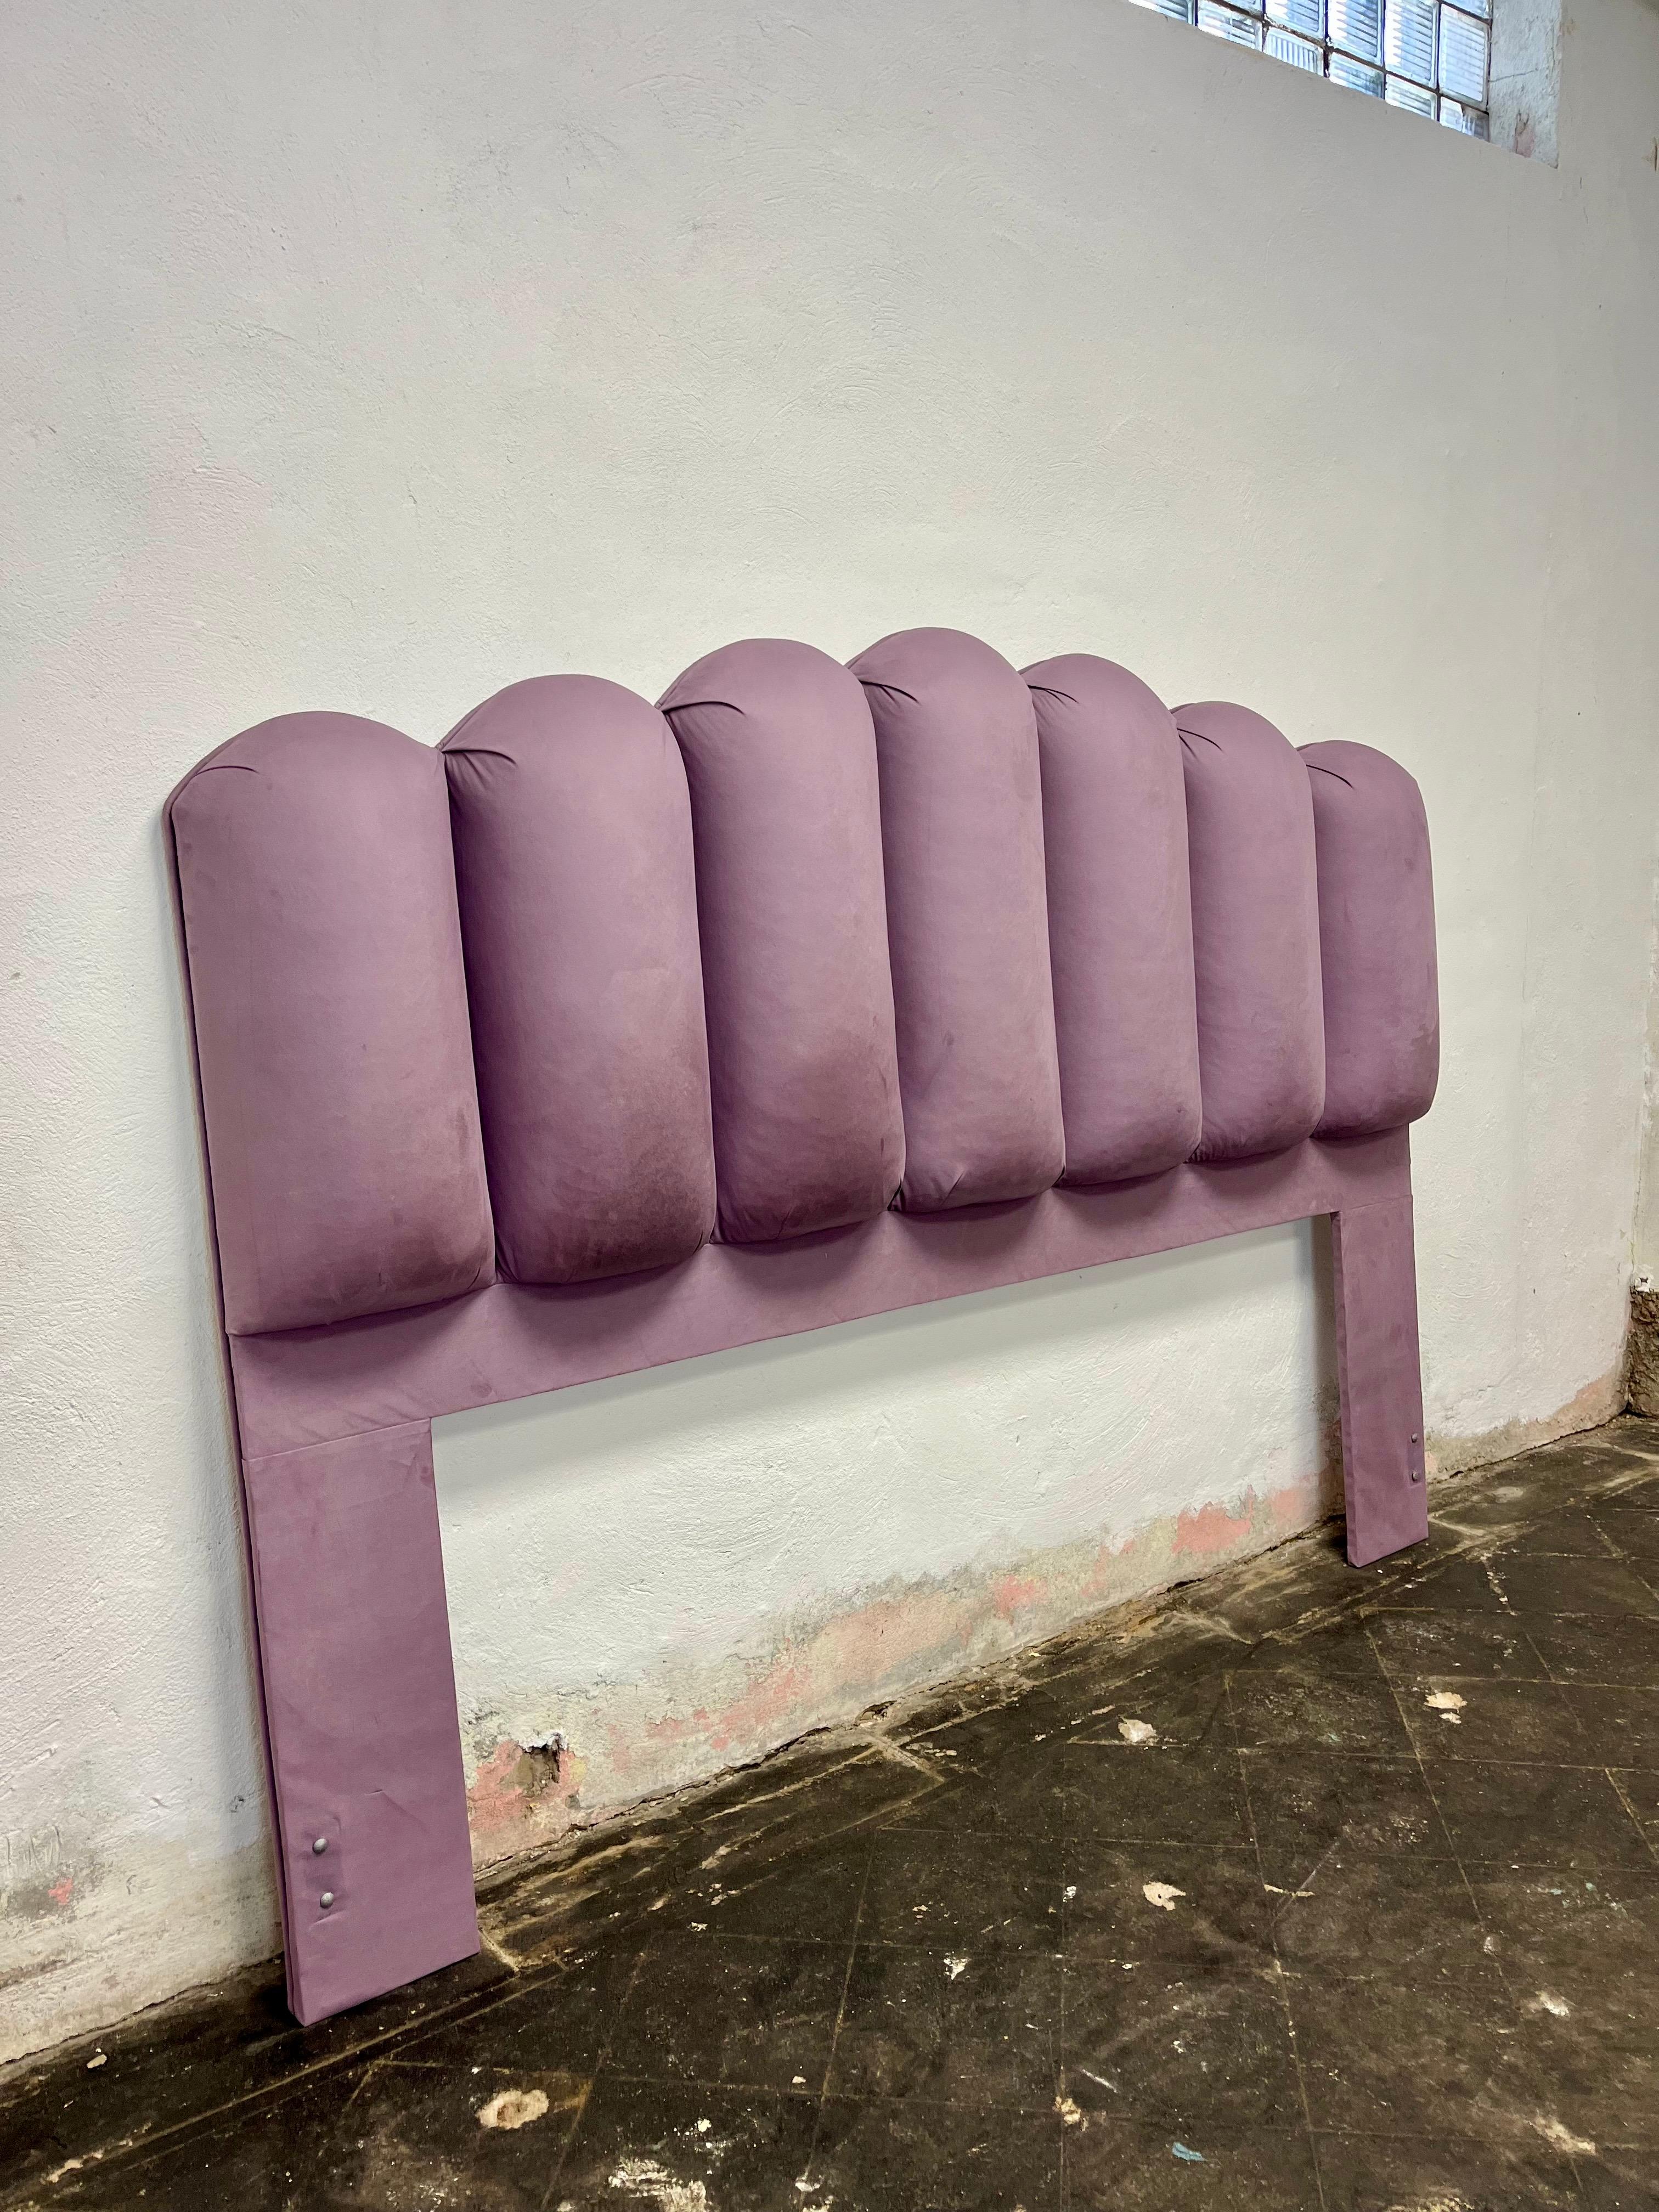 Terrific upholstered headboard. Ultra Suede upholstery. Classic art deco design with skyscraper tufted texture.
Curbside to NYC/Philly $300